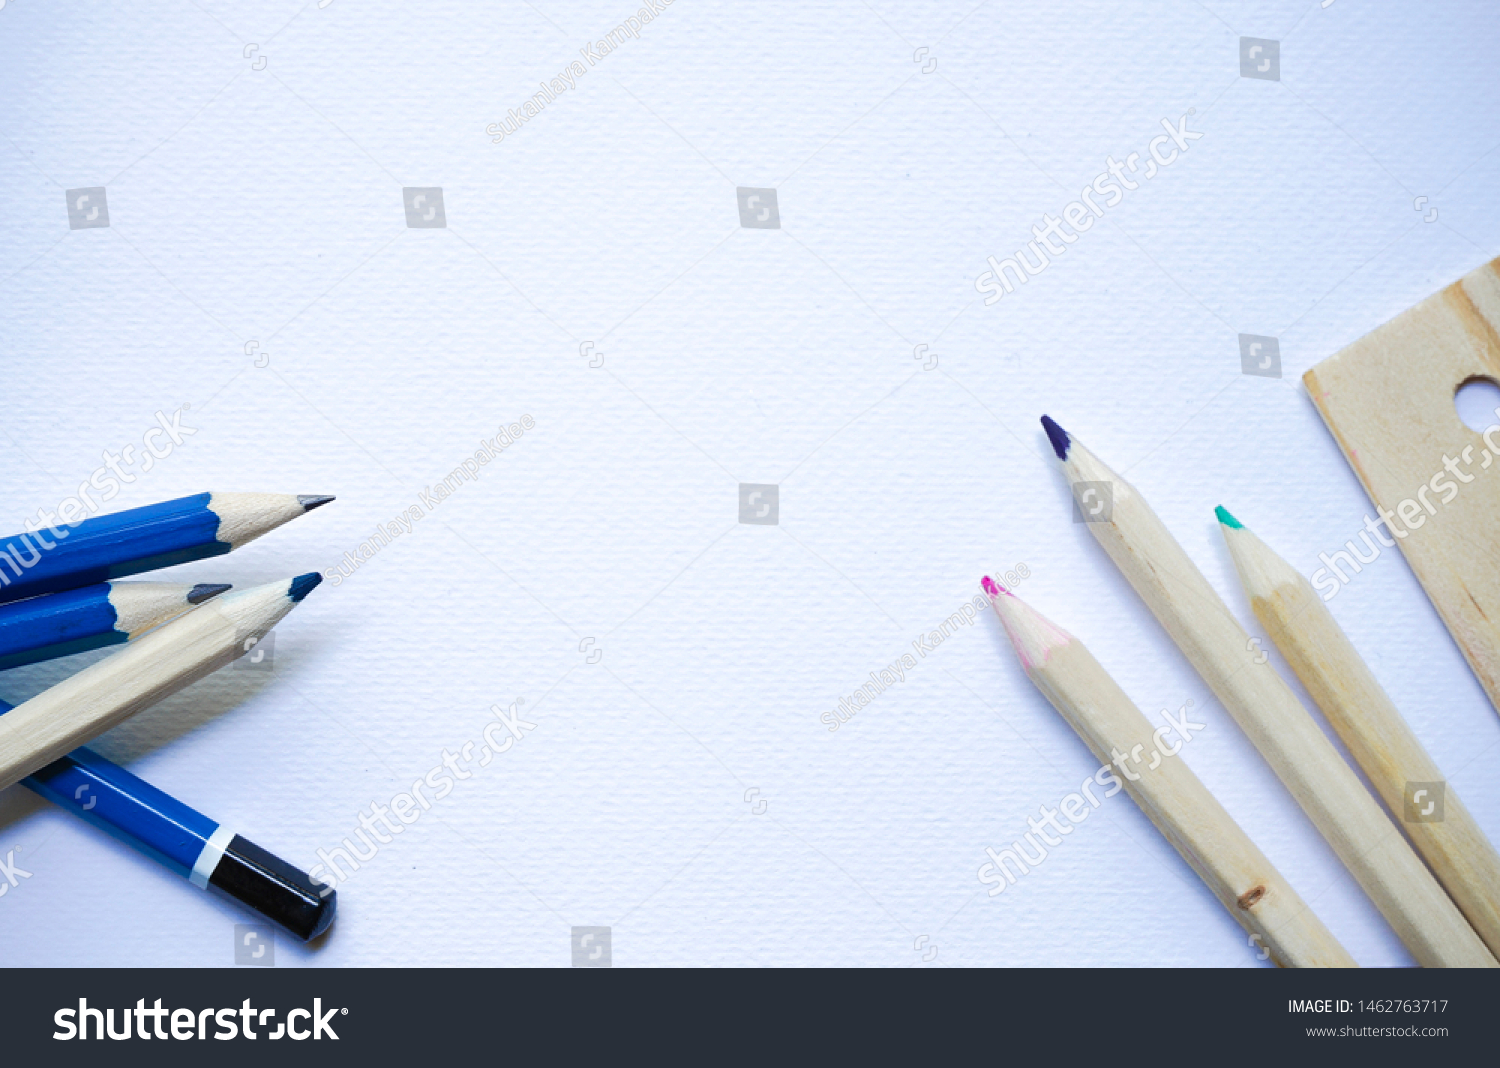 2B pencils and wooden colored pencils with ruler on white water color canvas background #1462763717